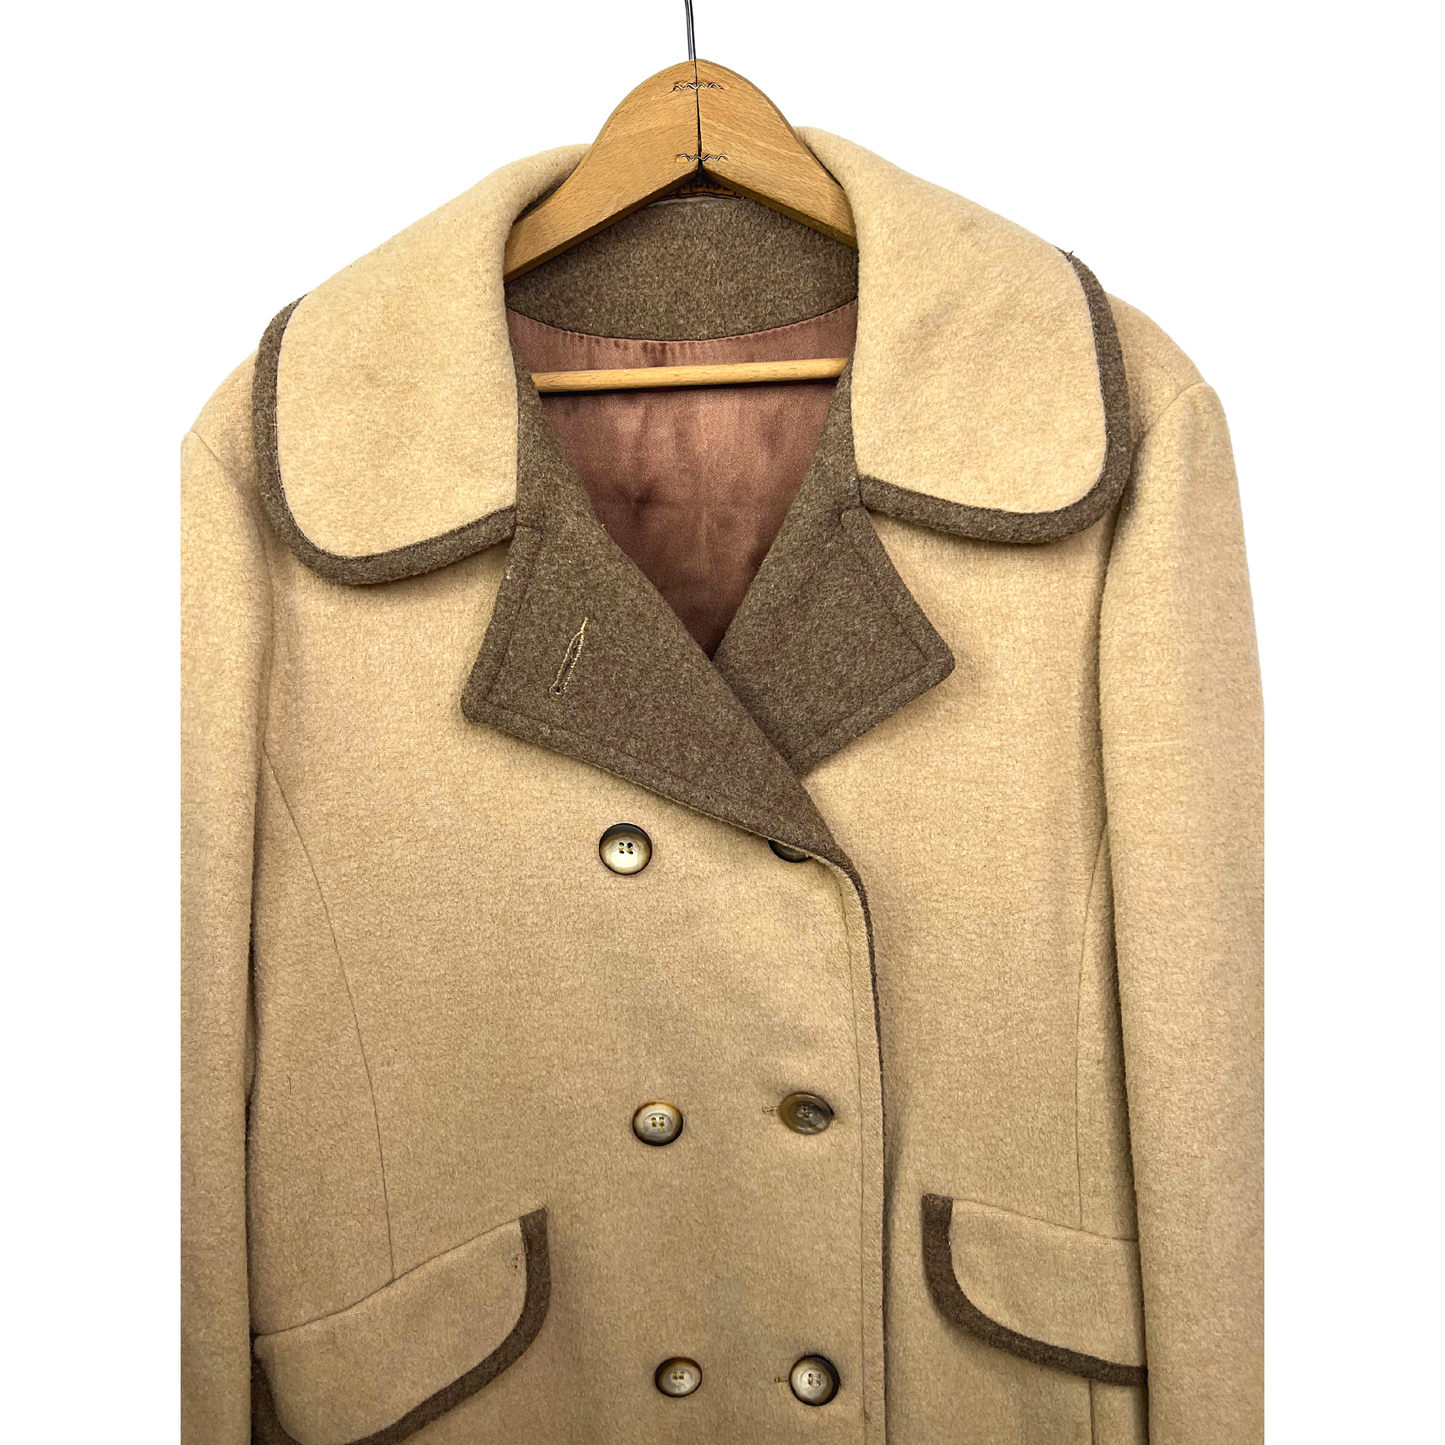 60’s Tan Wool Mackintosh Double-Breasted Peacoat Size Large